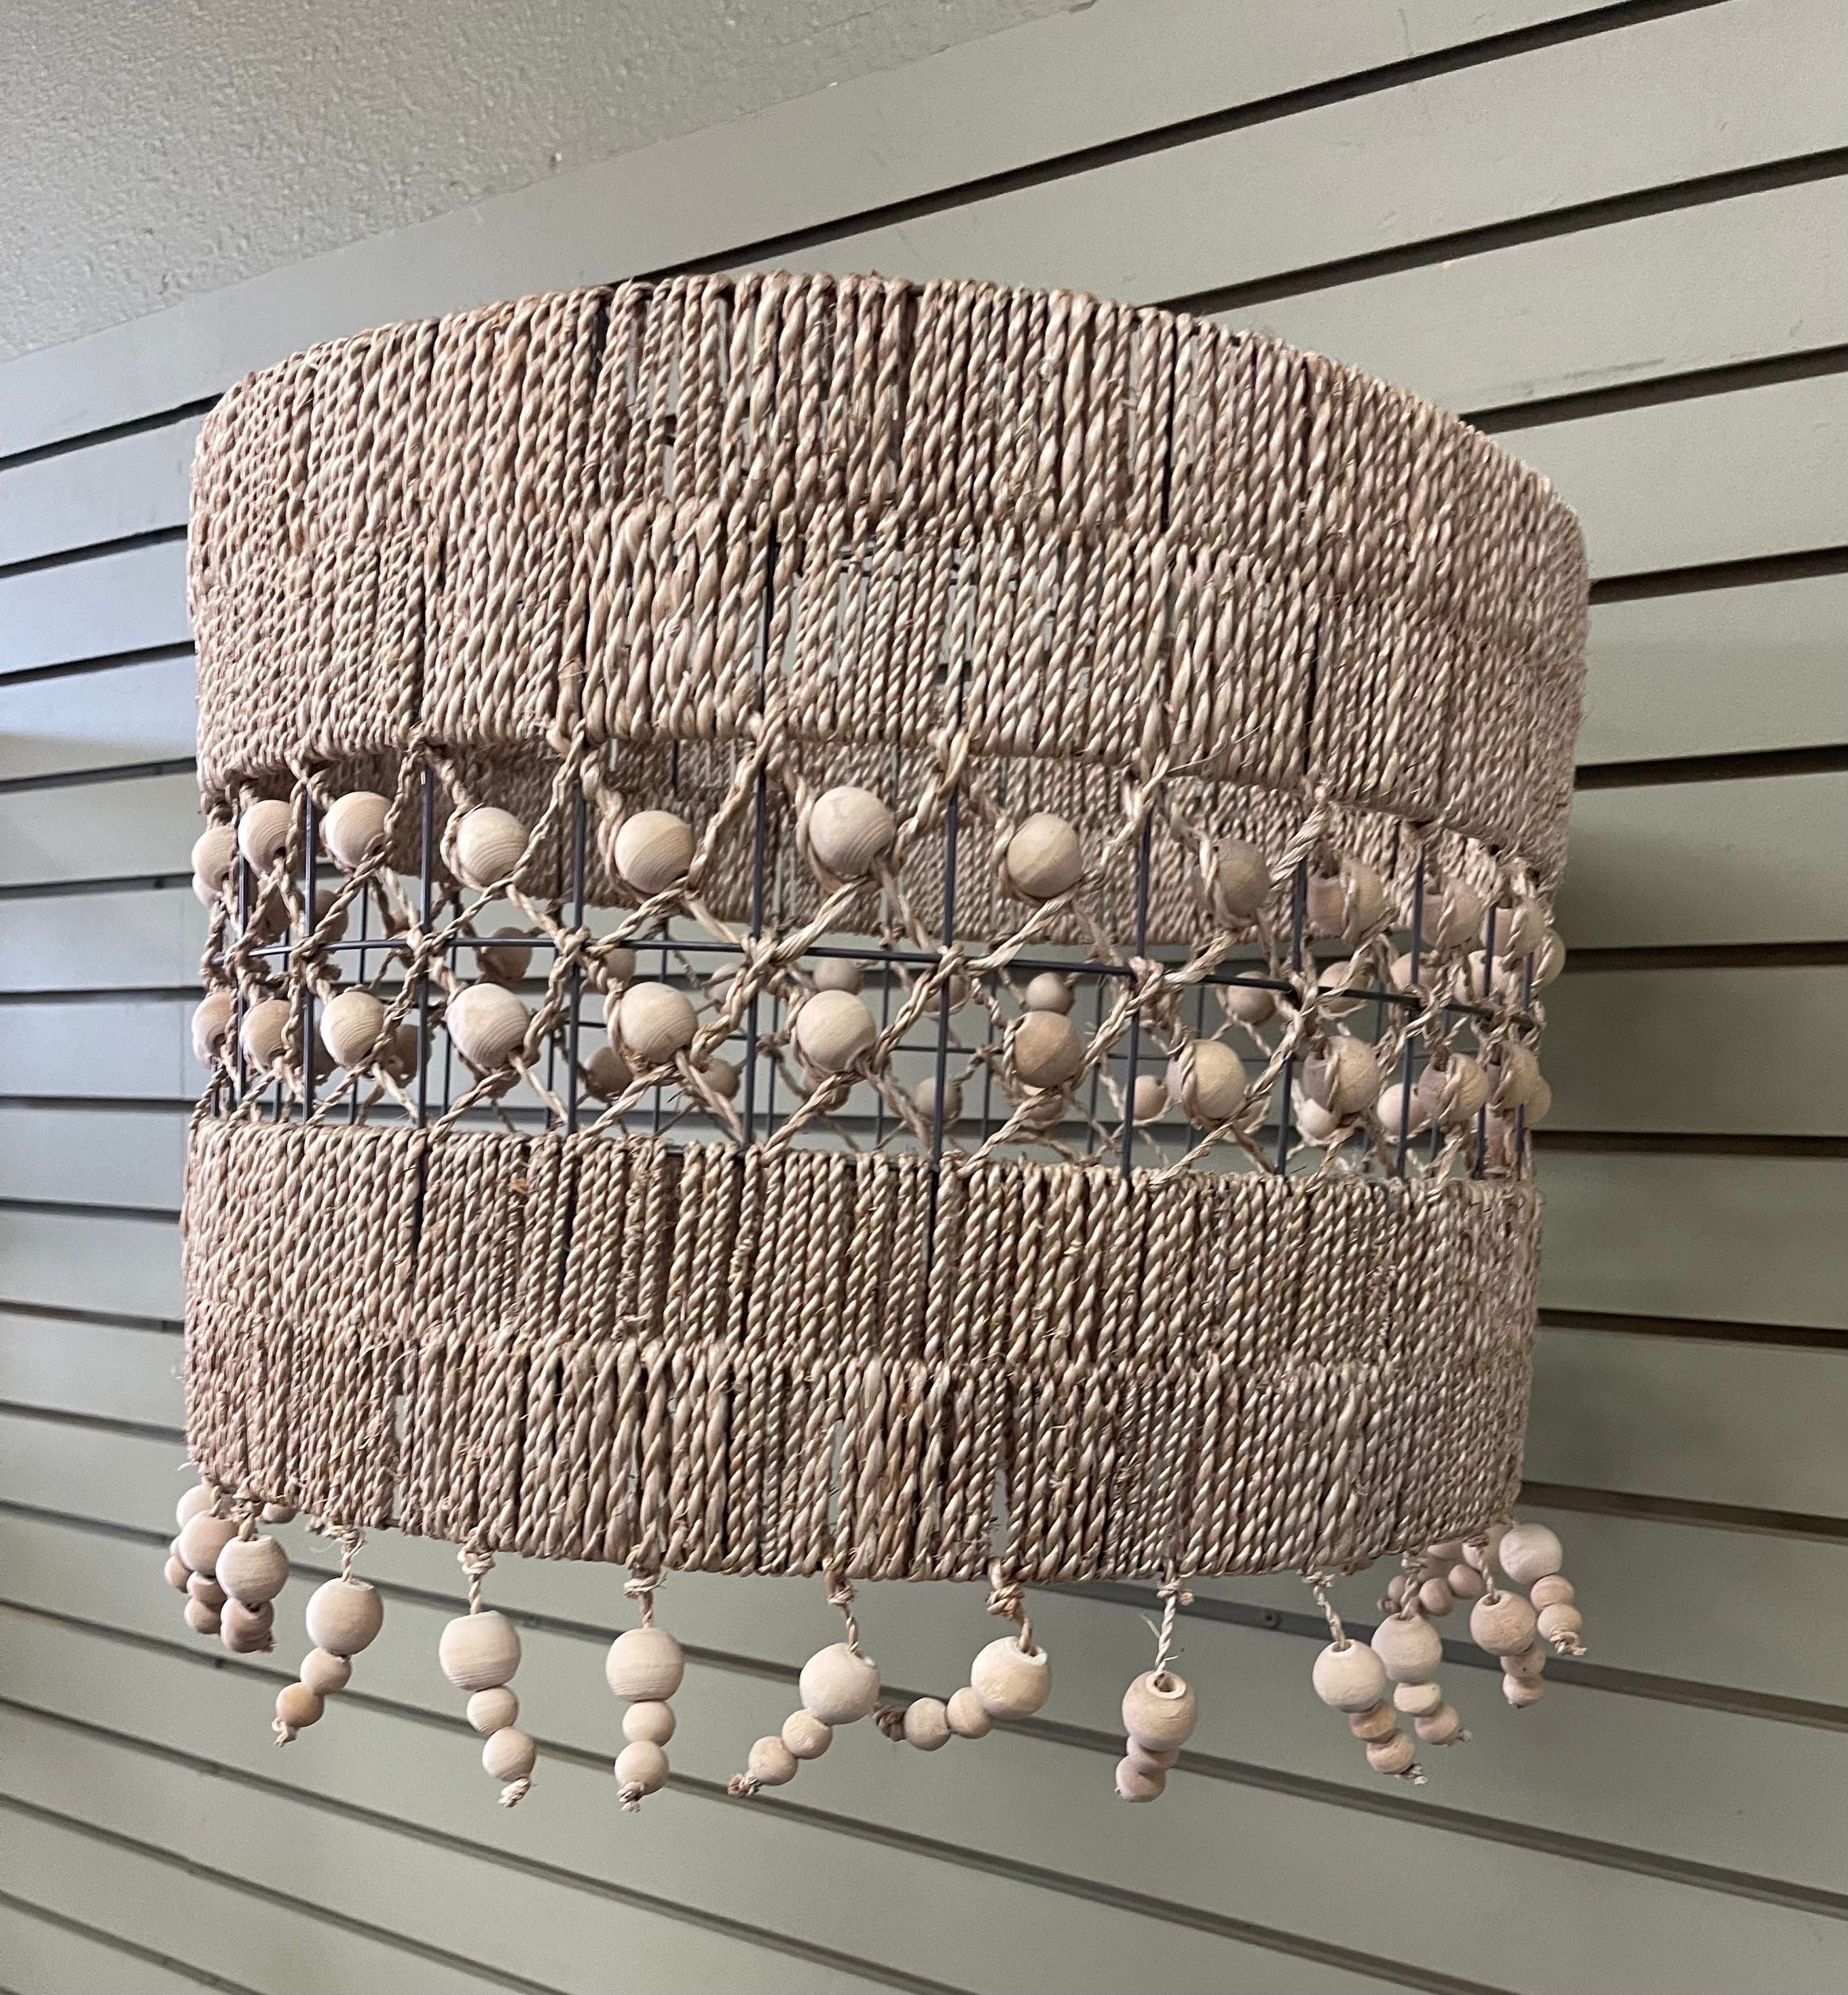 Super cool bohemian cord and wood beads drum lamp shade, circa 1980s. The shade is in very good vintage condition and measures 17